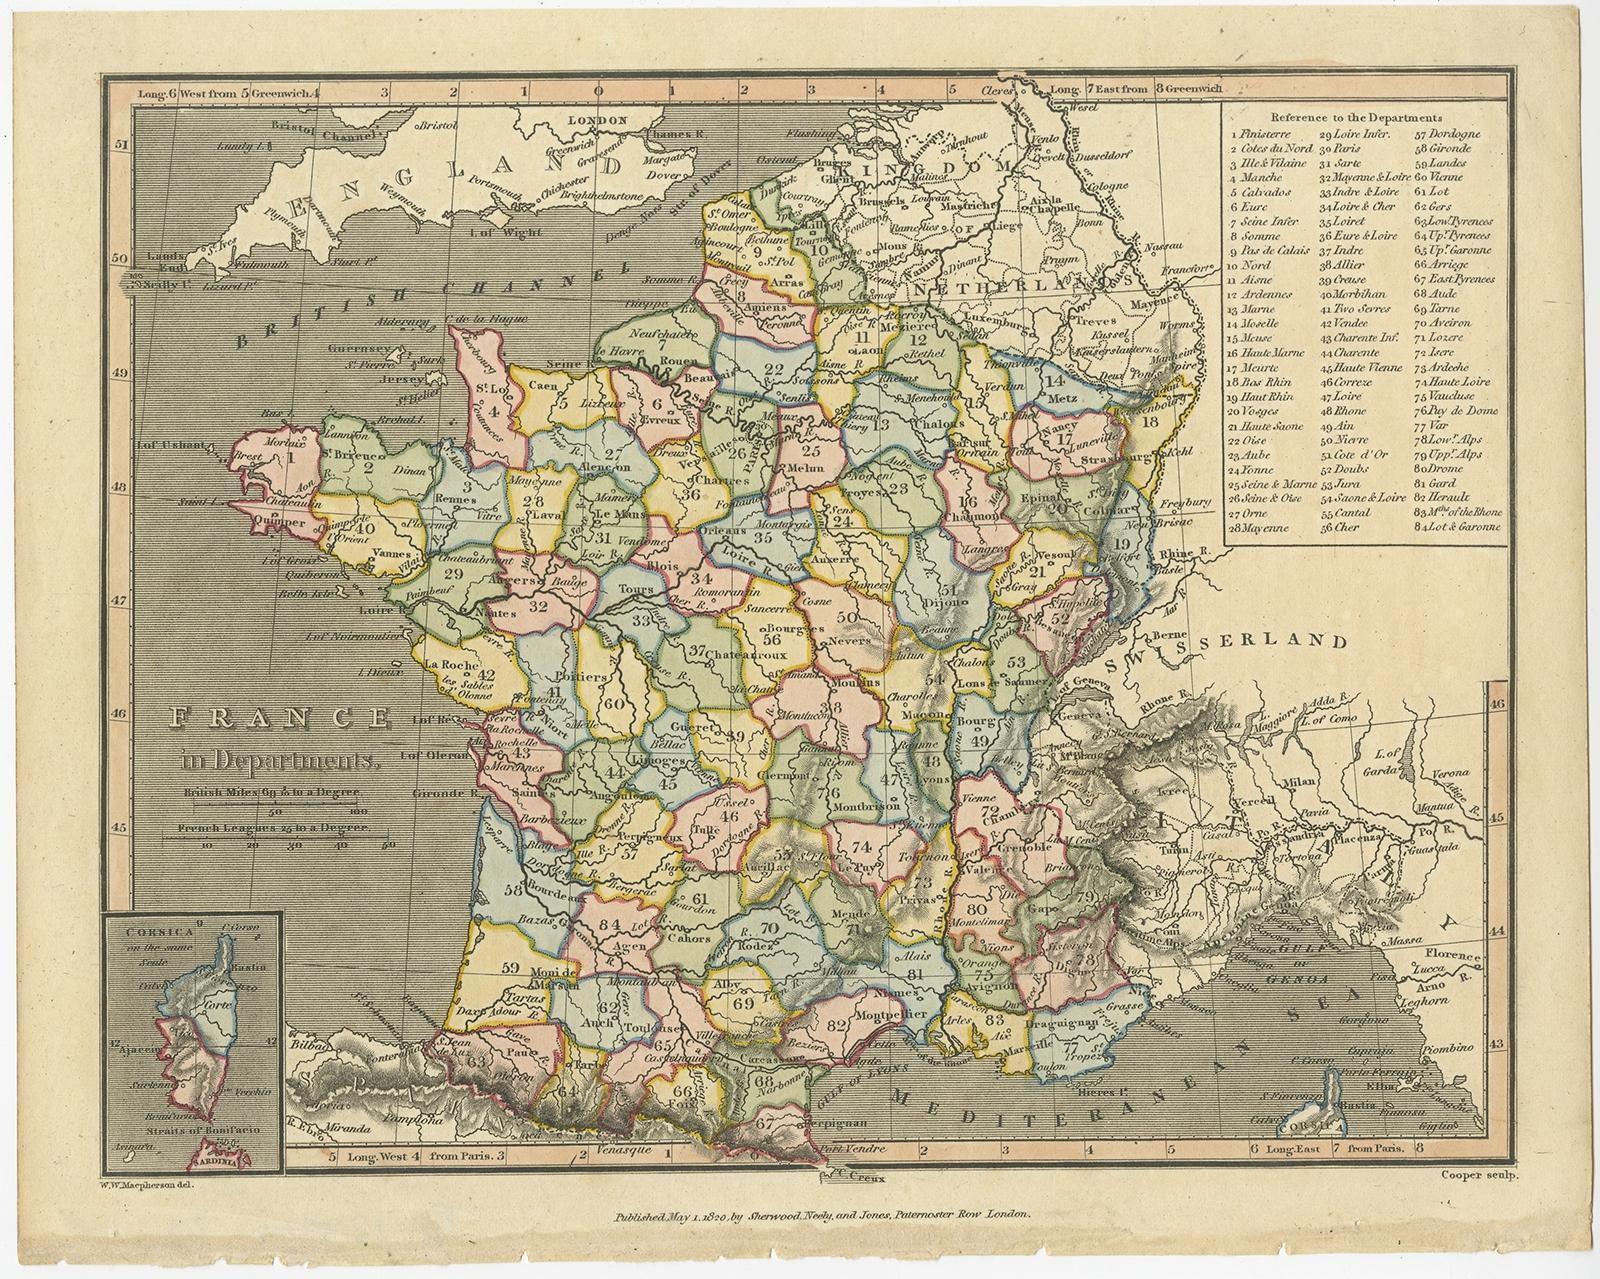 Antique map titled 'France in Departments'. Old map of France, with small inset map of the island of Corsica. Includes a table with reference to the departments. 

Artists and Engravers: Engraved by Cooper. Published by Sherwood, Neely and